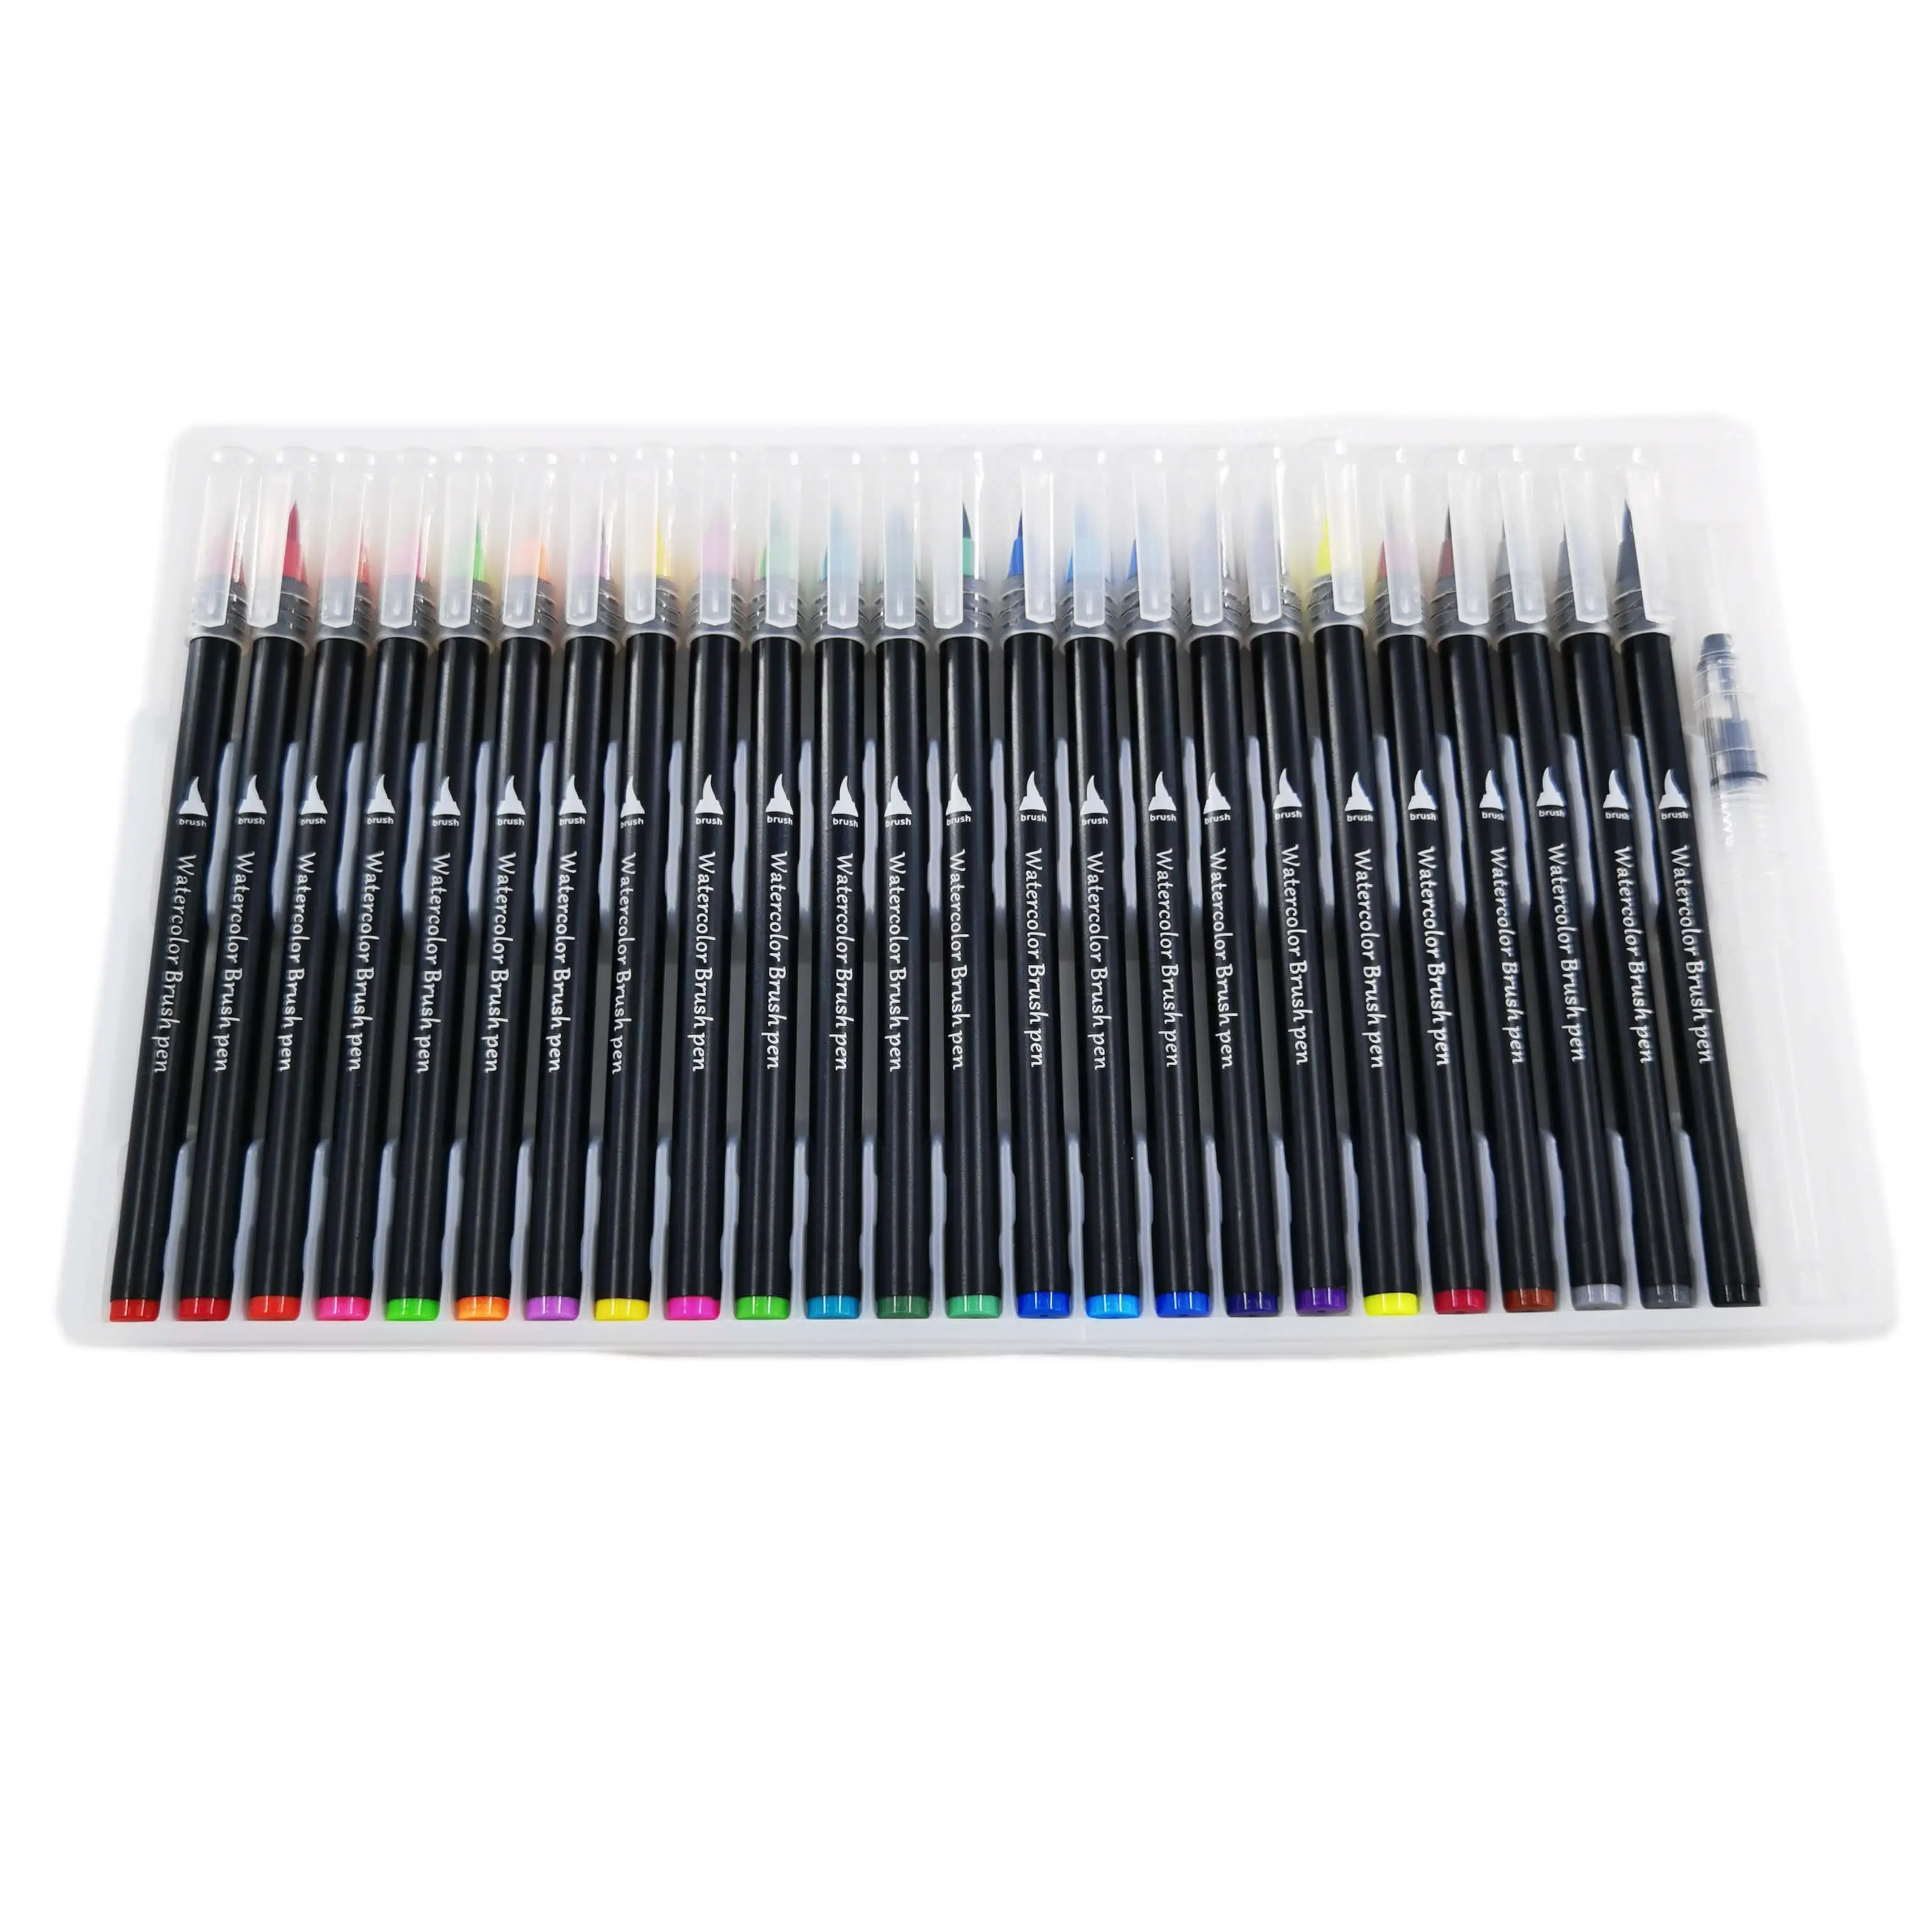 24 Colors Single Tip Markers And 1 Refillable Water Brush Pen Art Markers Painting Calligraphy Brush Pen